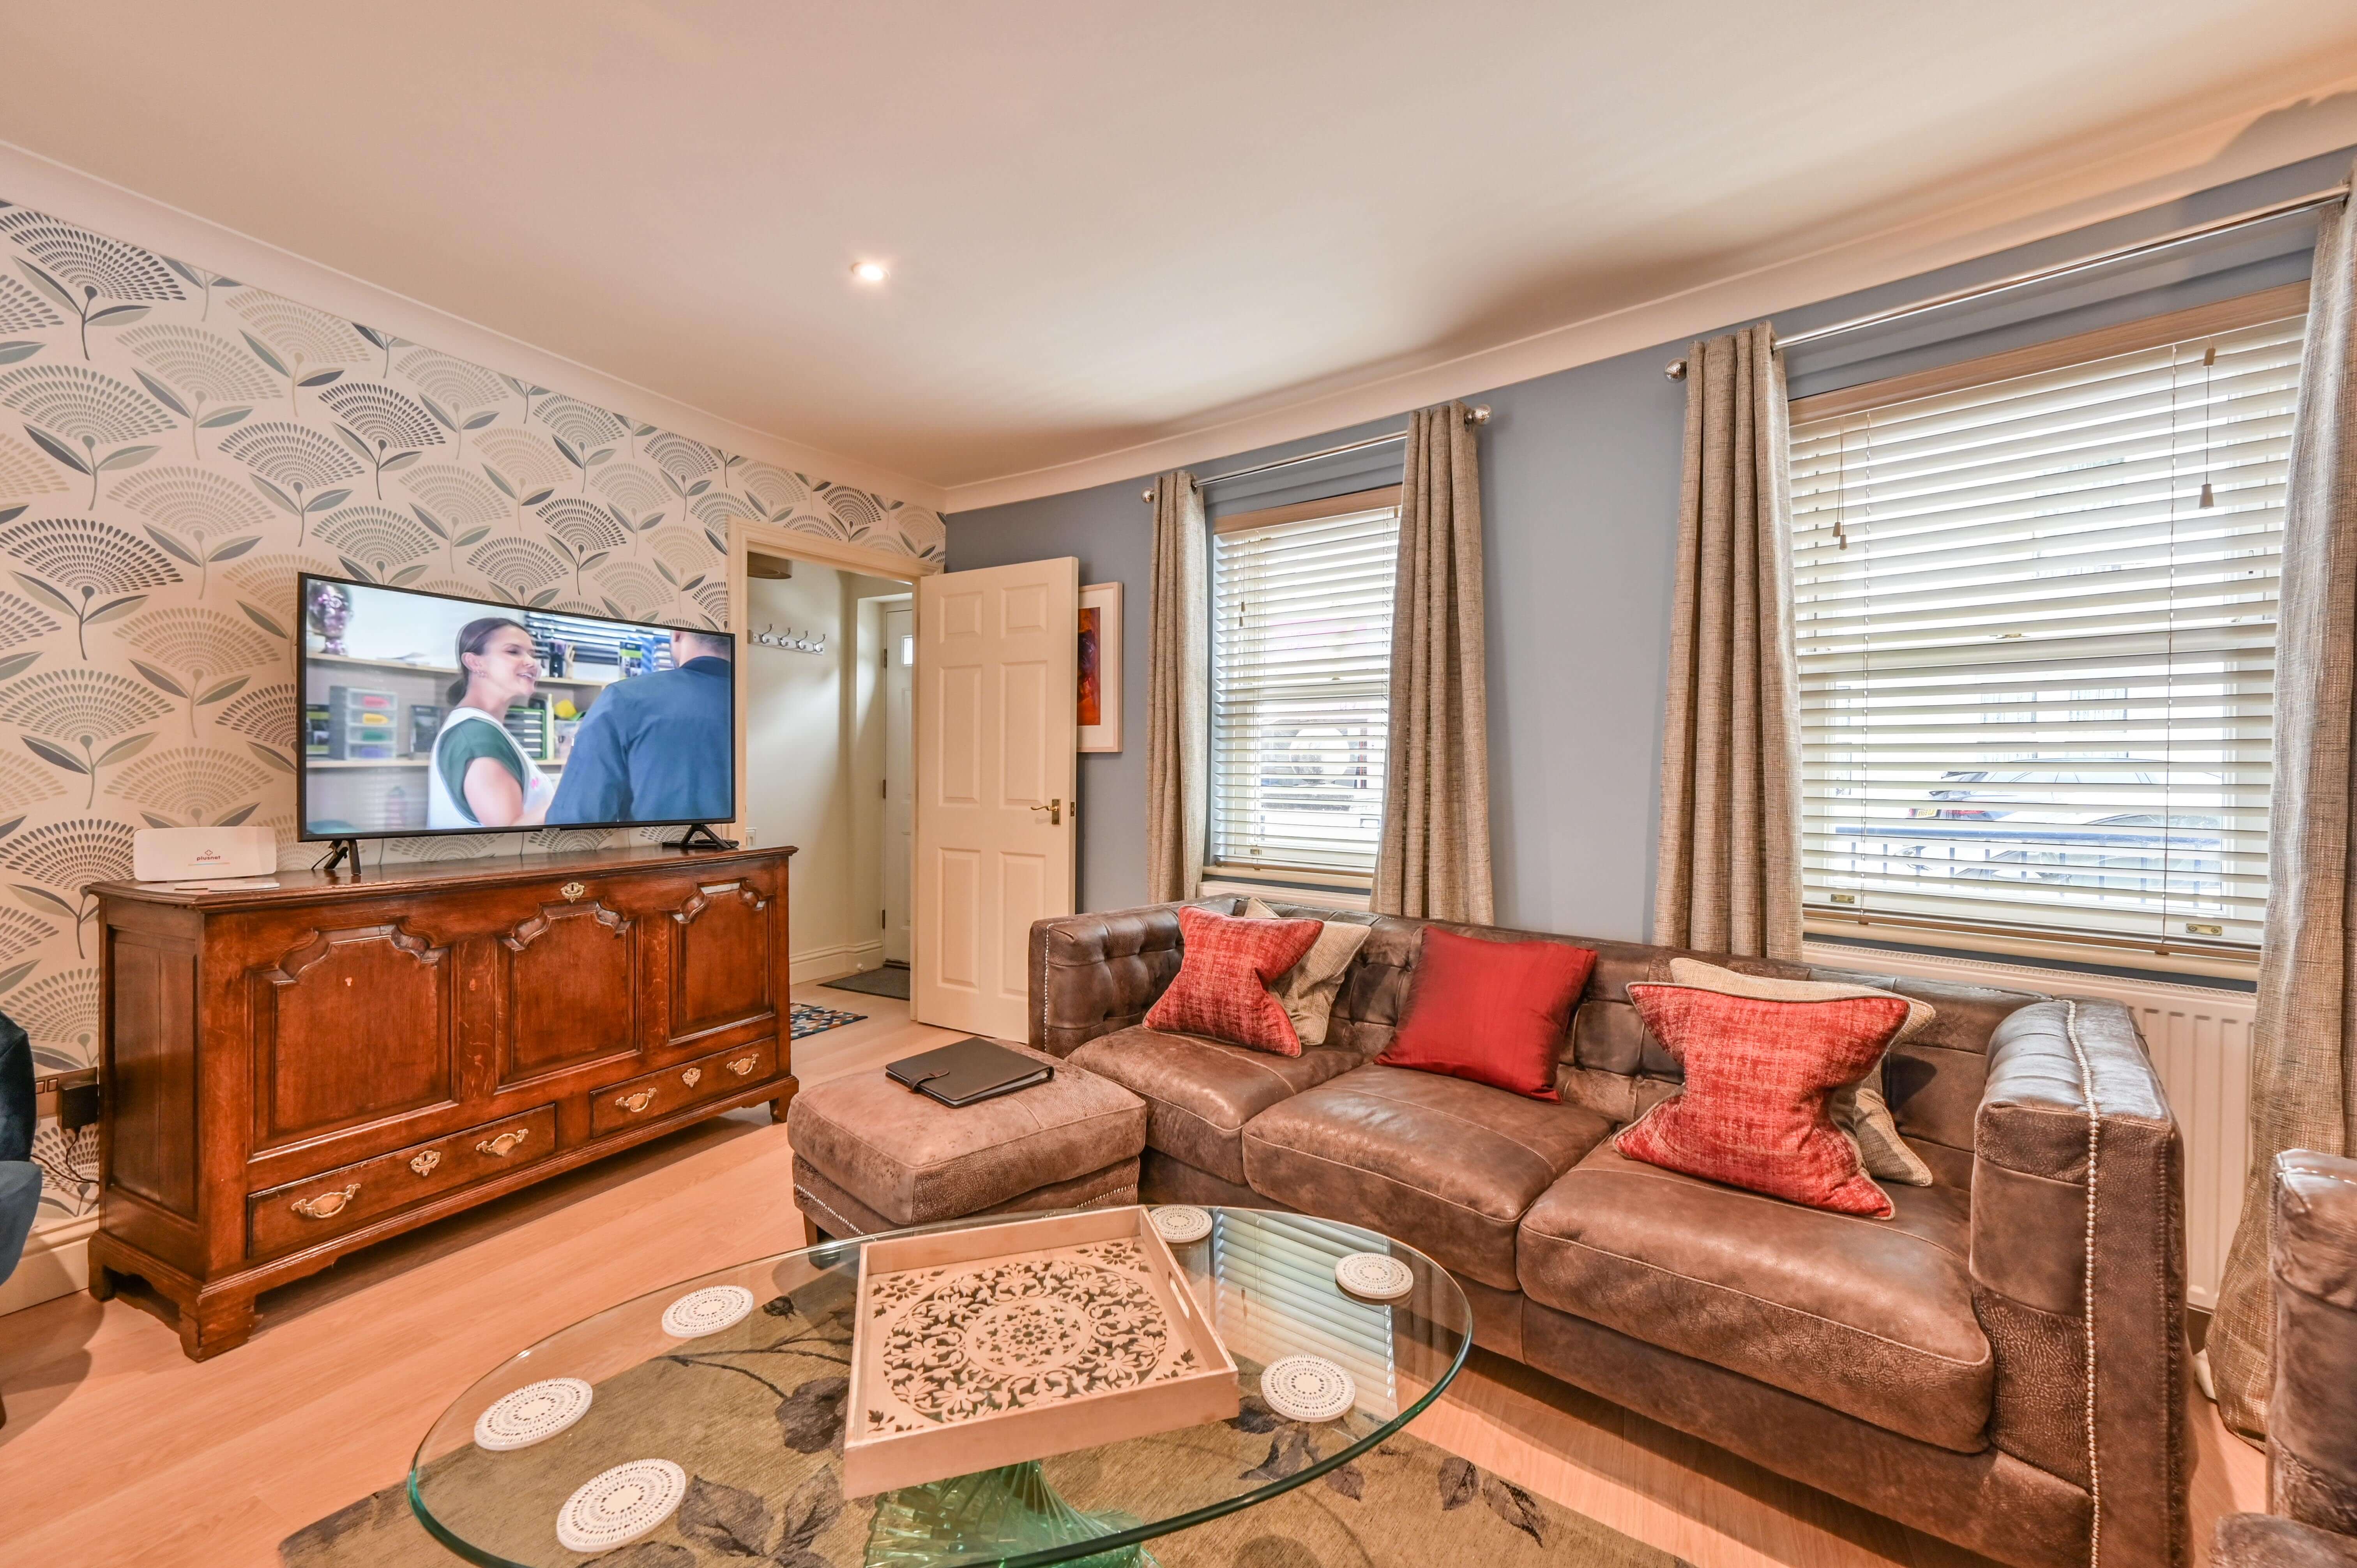 Lisburne Place Luxury town House Holiday Accommodation in Torquay - open plan living space.